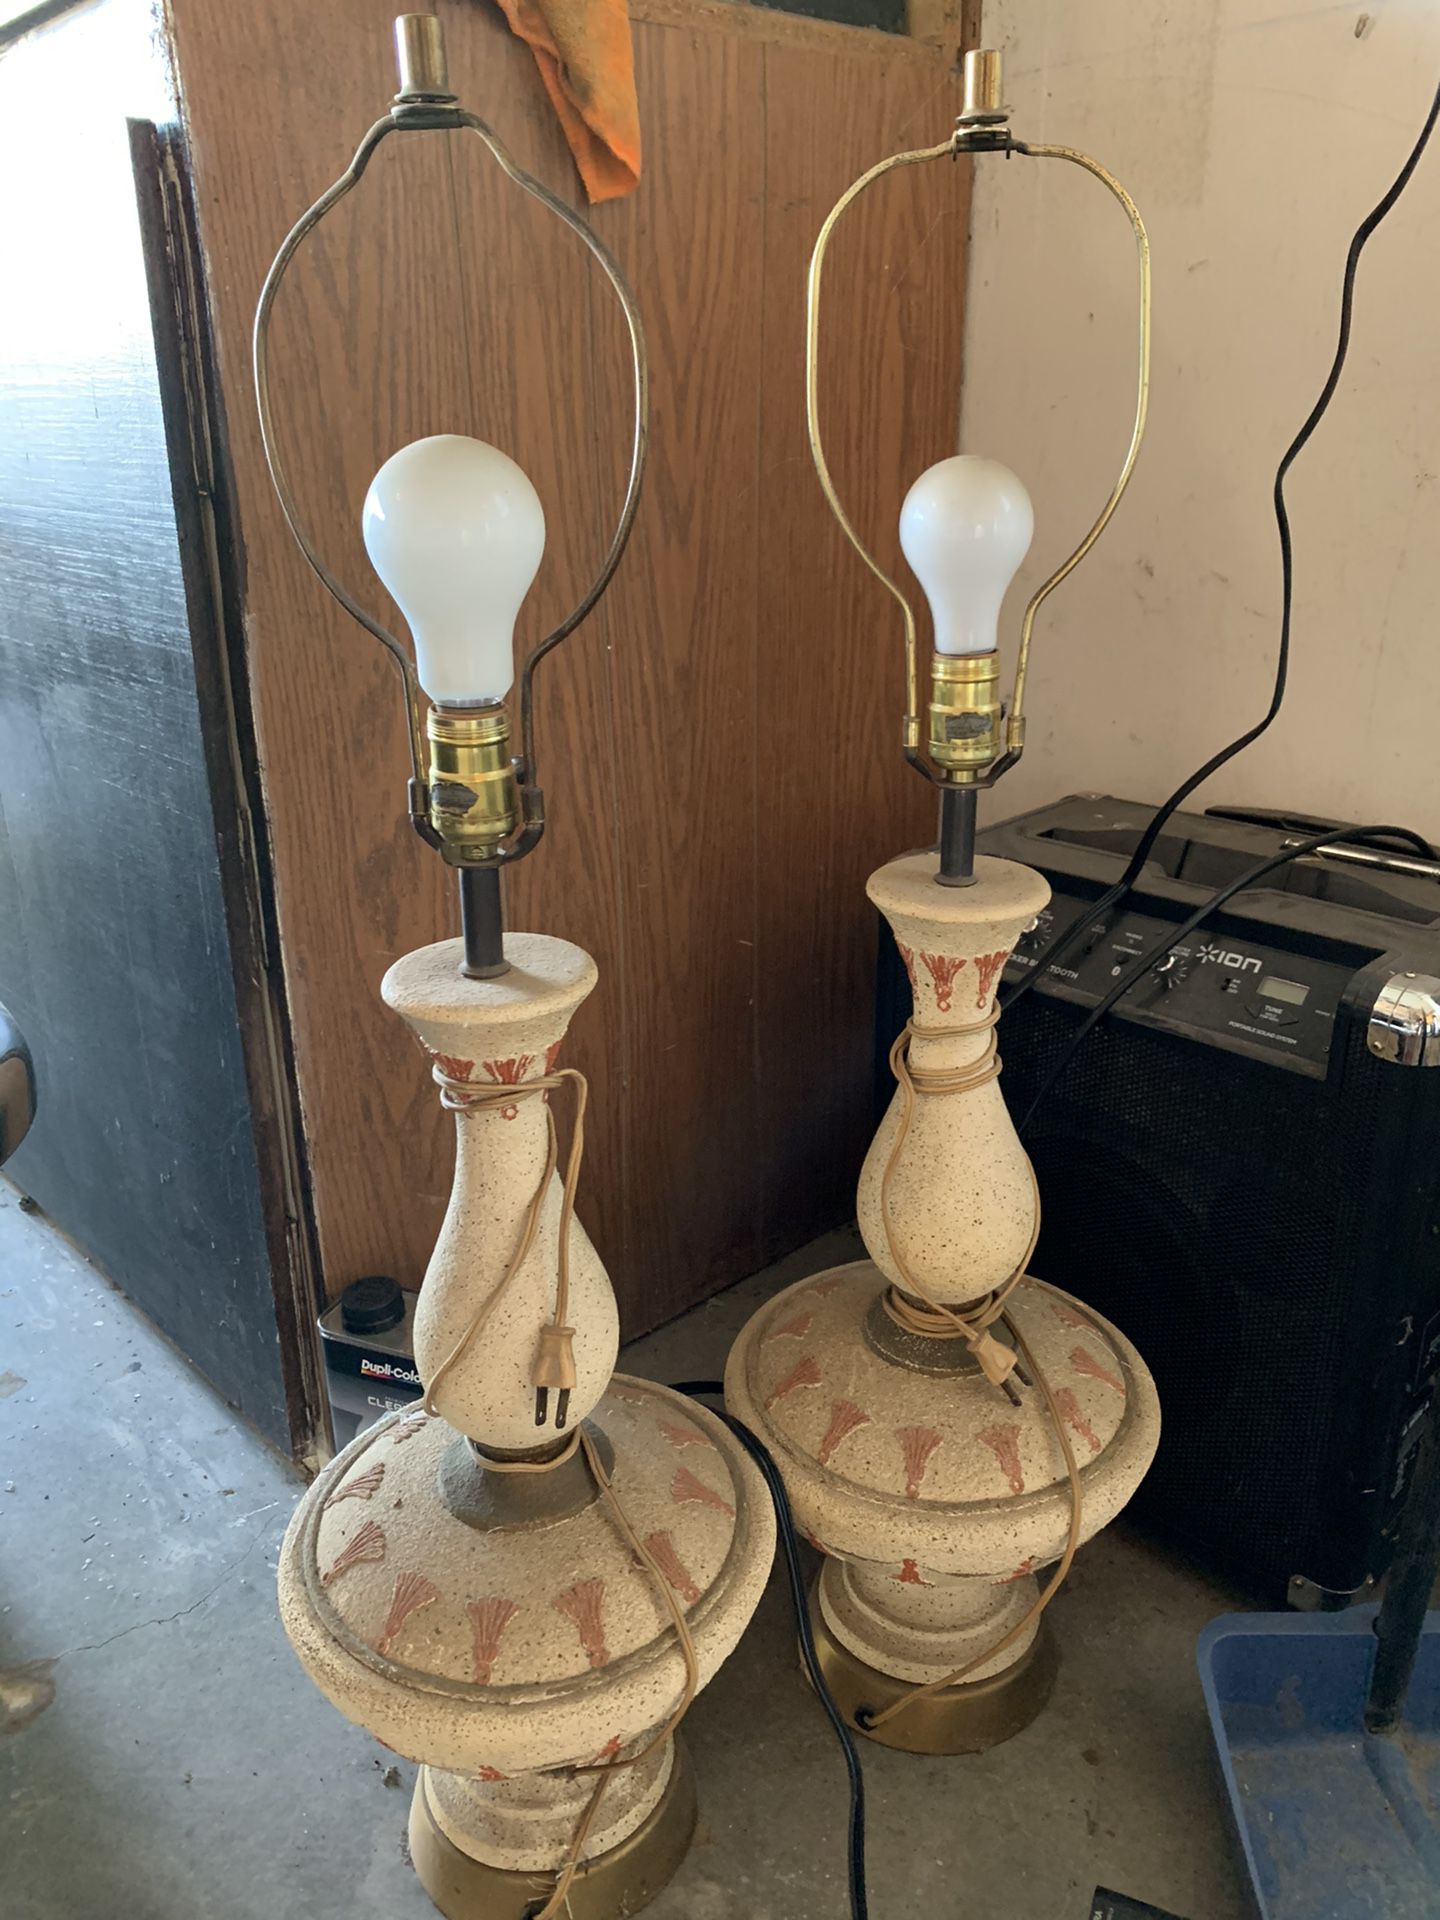 Free lamps